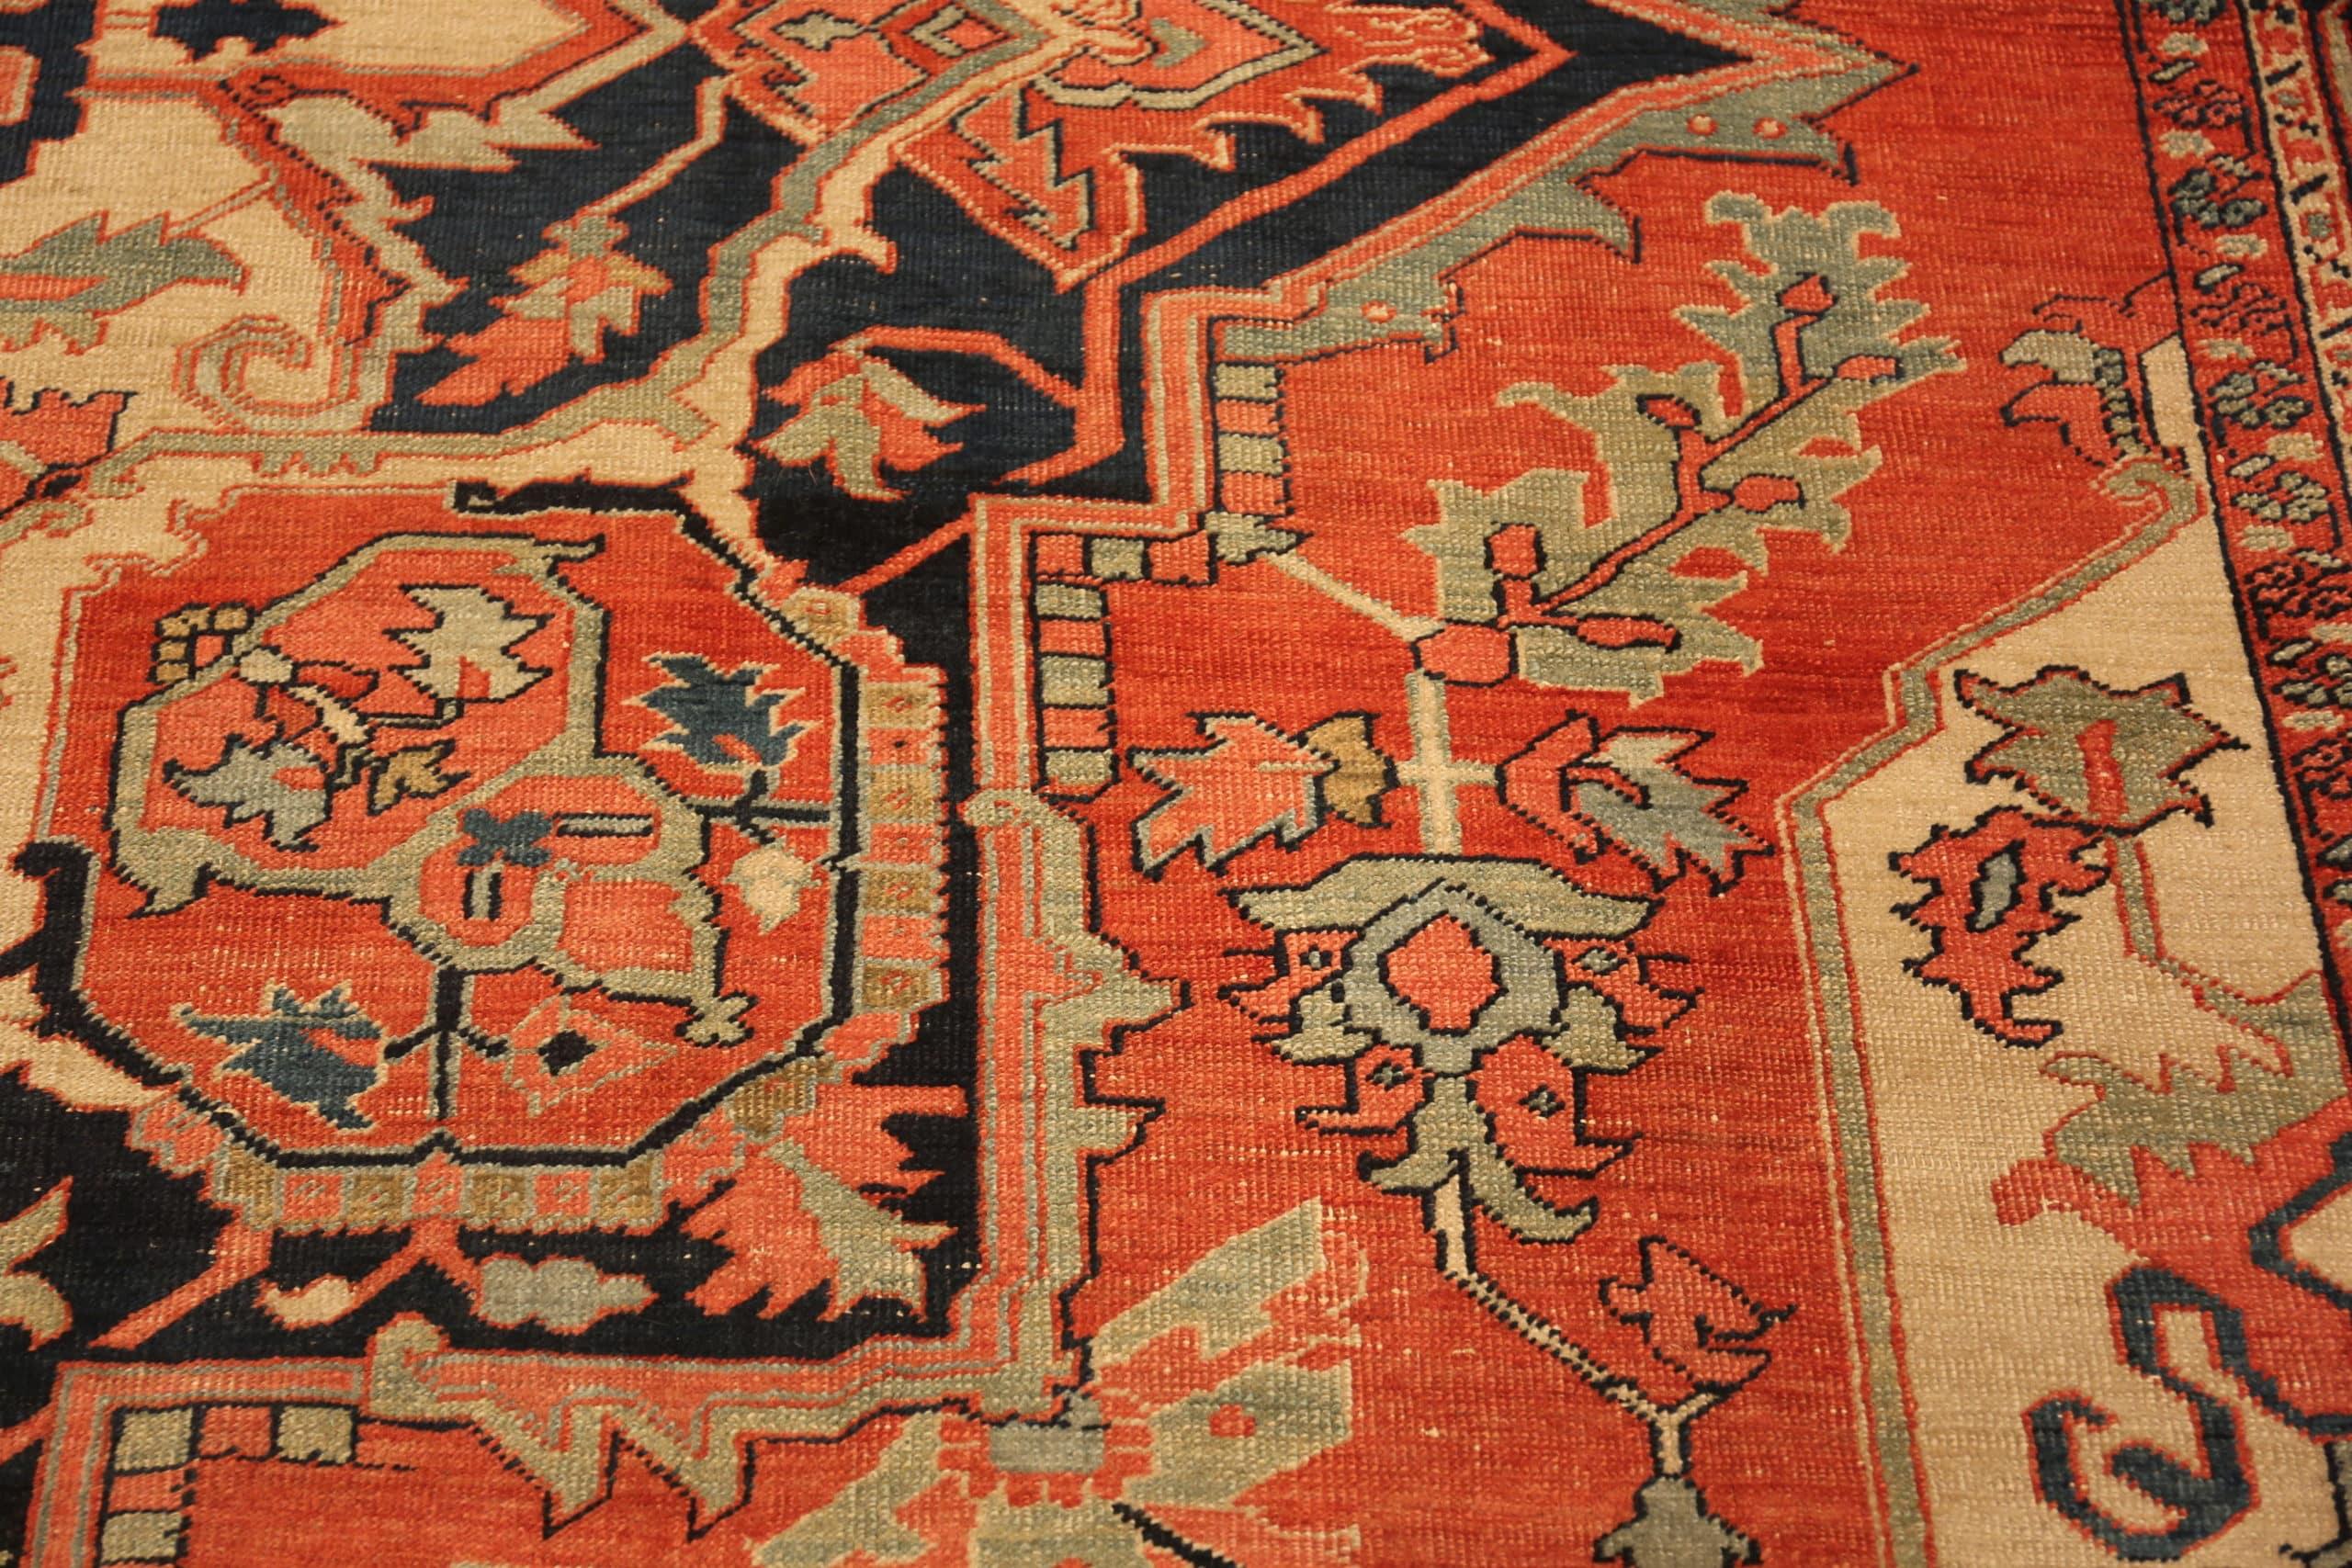 20th Century Antique Persian Serapi Rug. Size: 10 ft 4 in x 13 ft 2 in